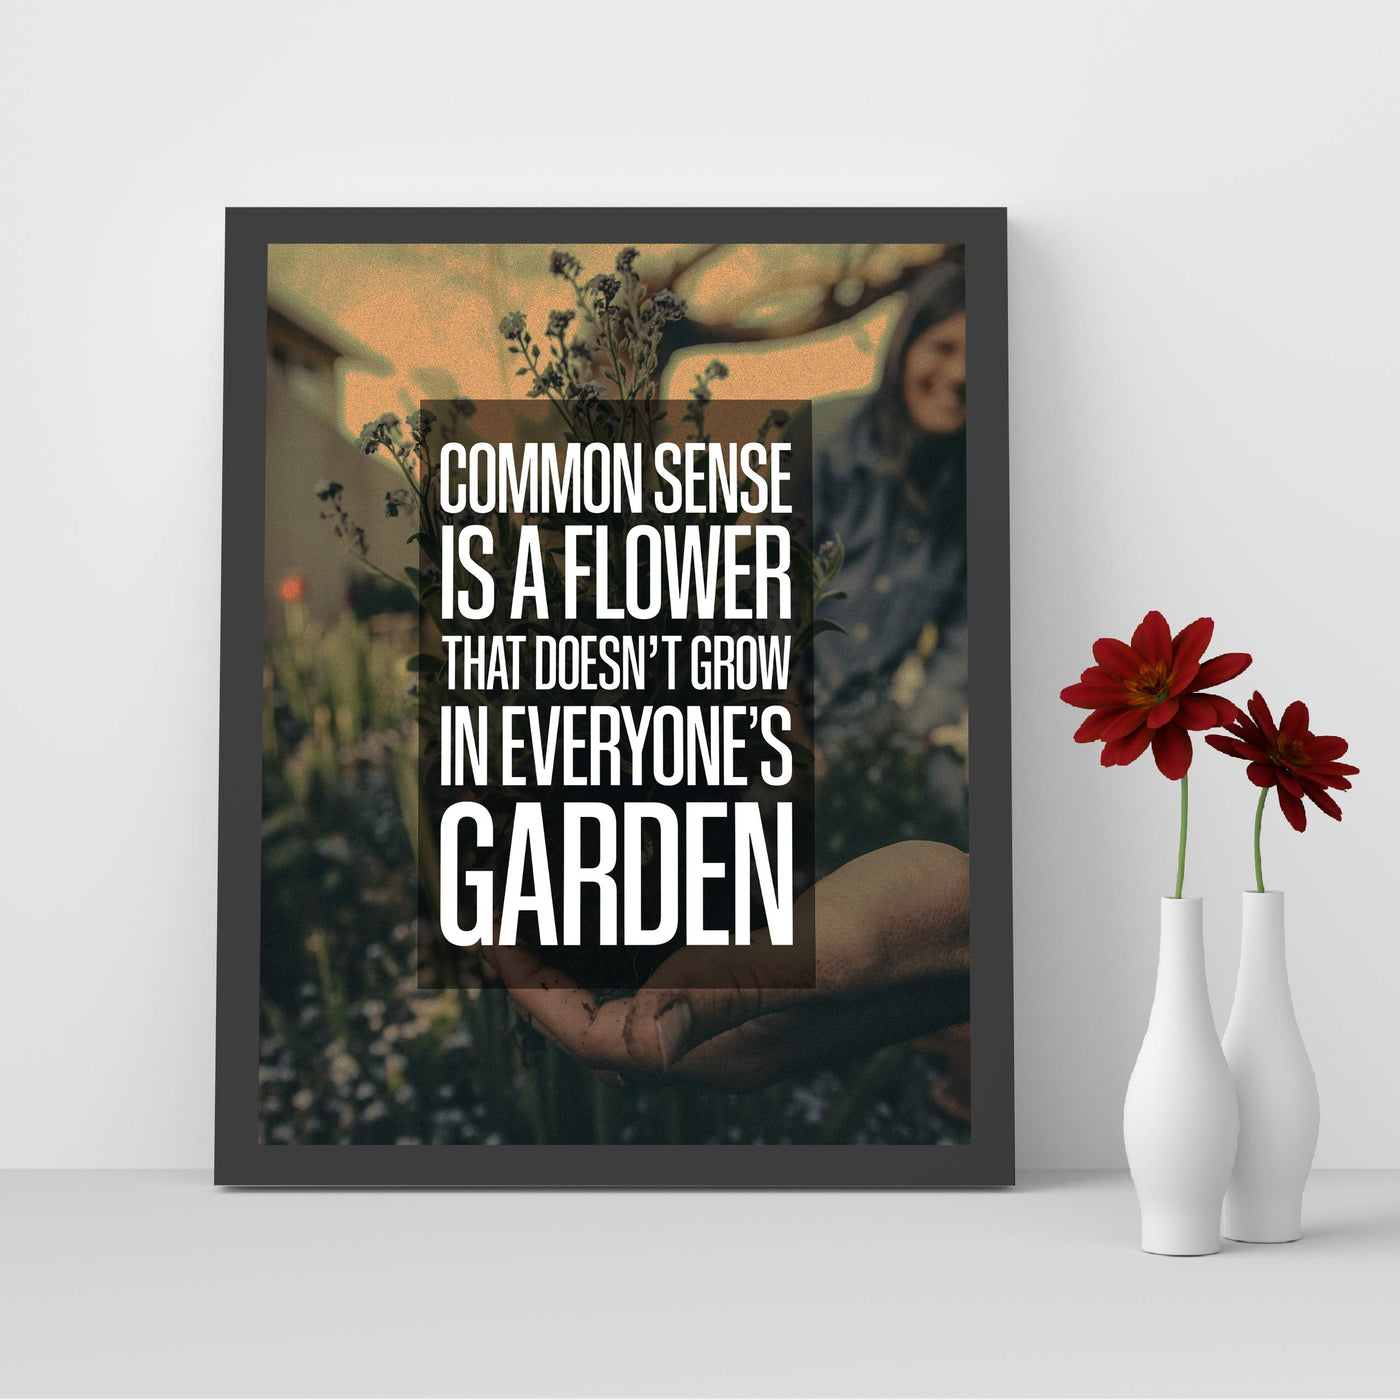 Common Sense-Flower That Doesn't Grow In Everyone's Garden Funny Wall Art -8 x 10" Sarcastic Floral Print-Ready to Frame. Humorous Home-Office-Bar-Shop-Cave Decor. Great Novelty Sign & Fun Gift!